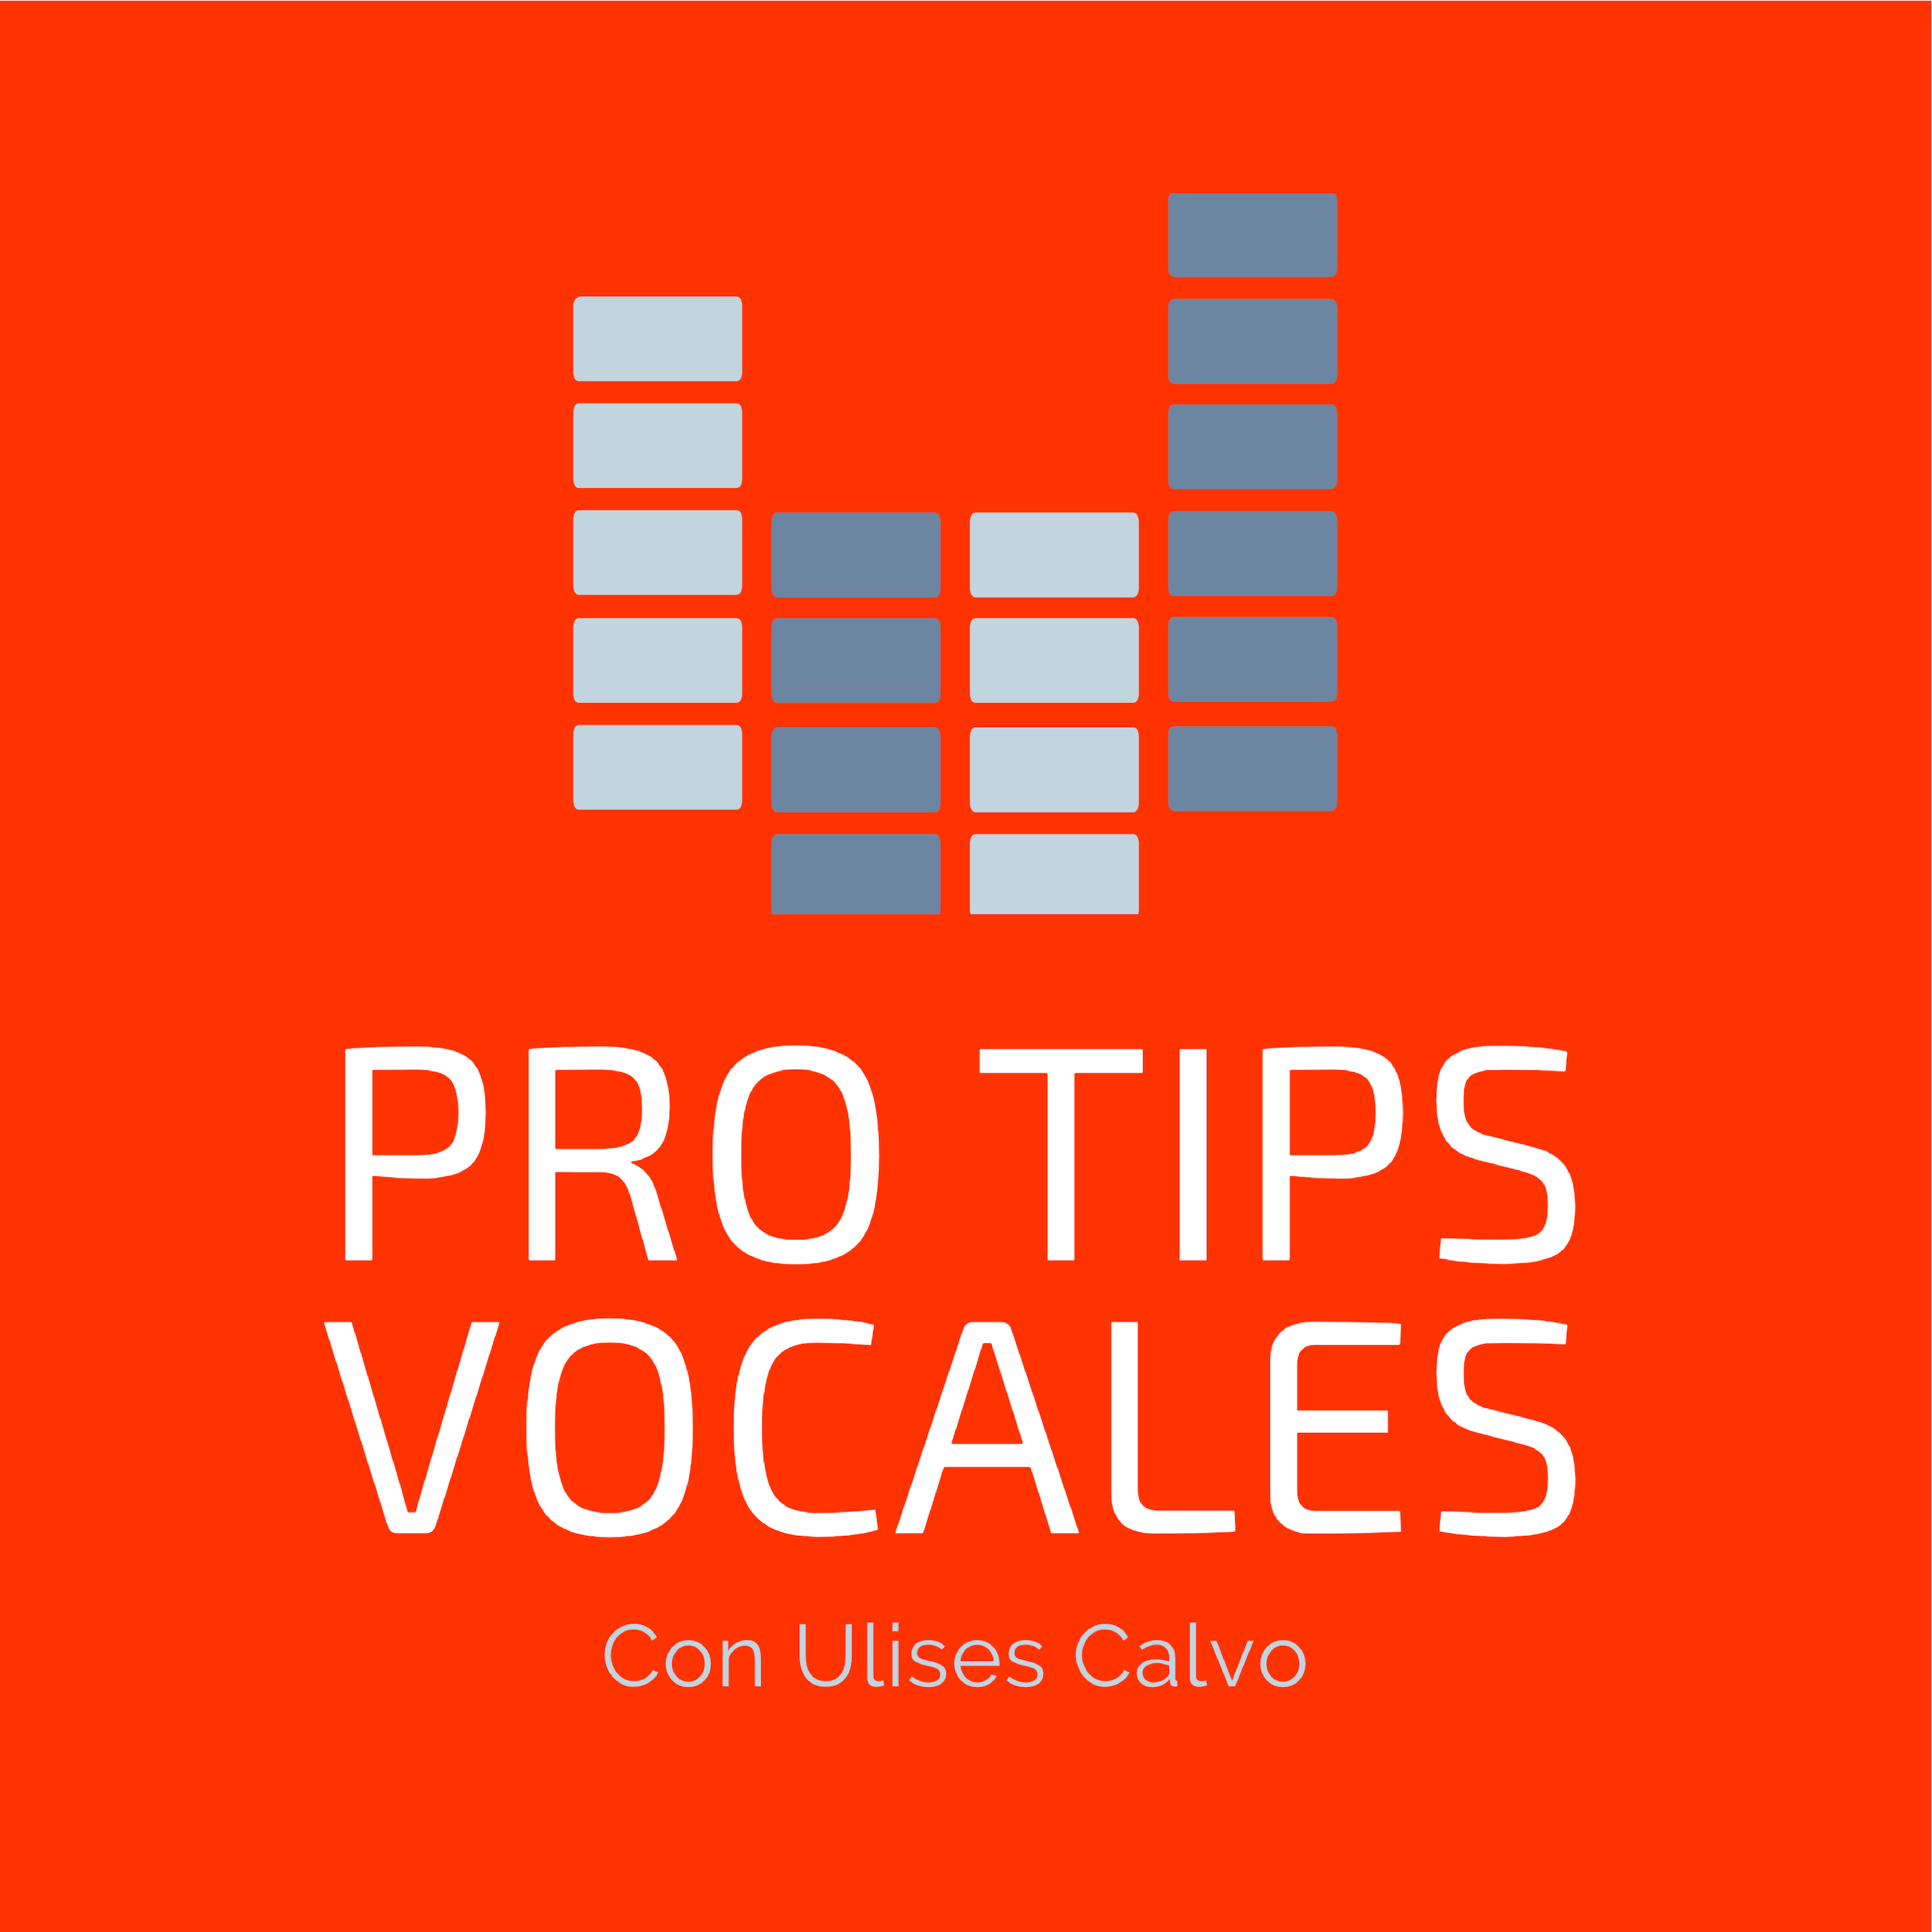 Pro Tips Vocales